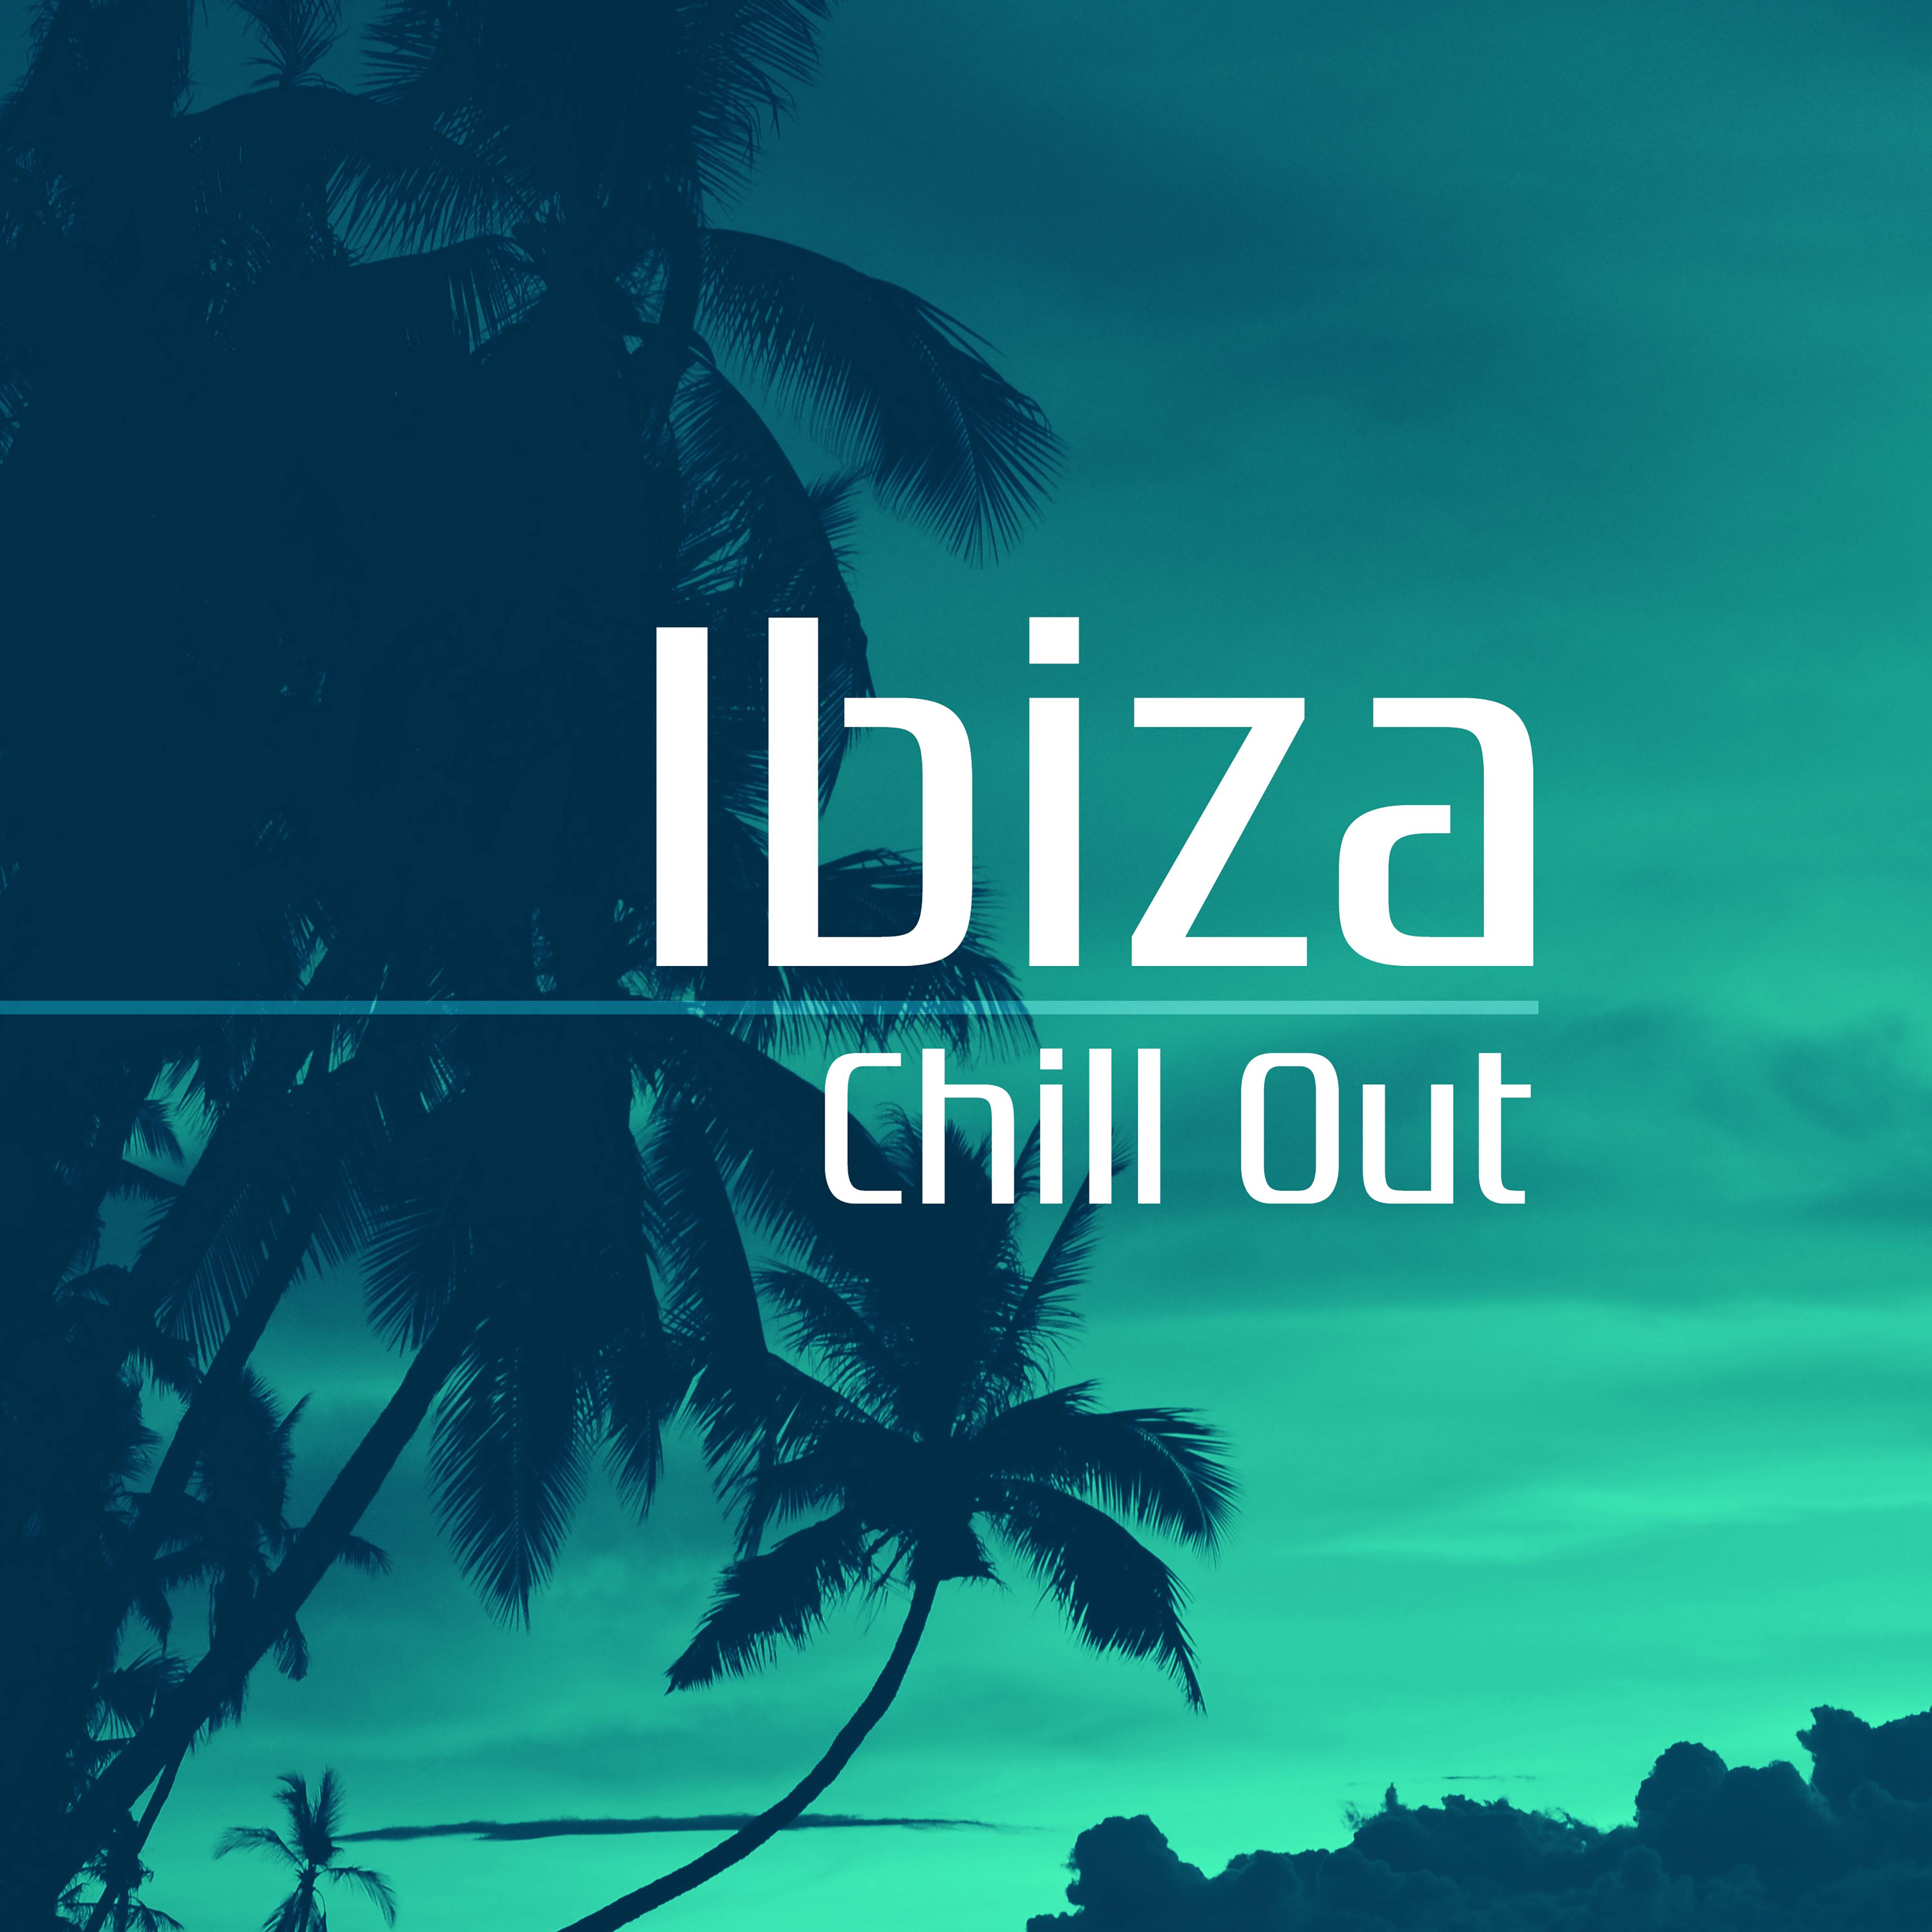 Ibiza Chill Out  Party Music, Dance Vibes, Hot Summer Chill, Beach House